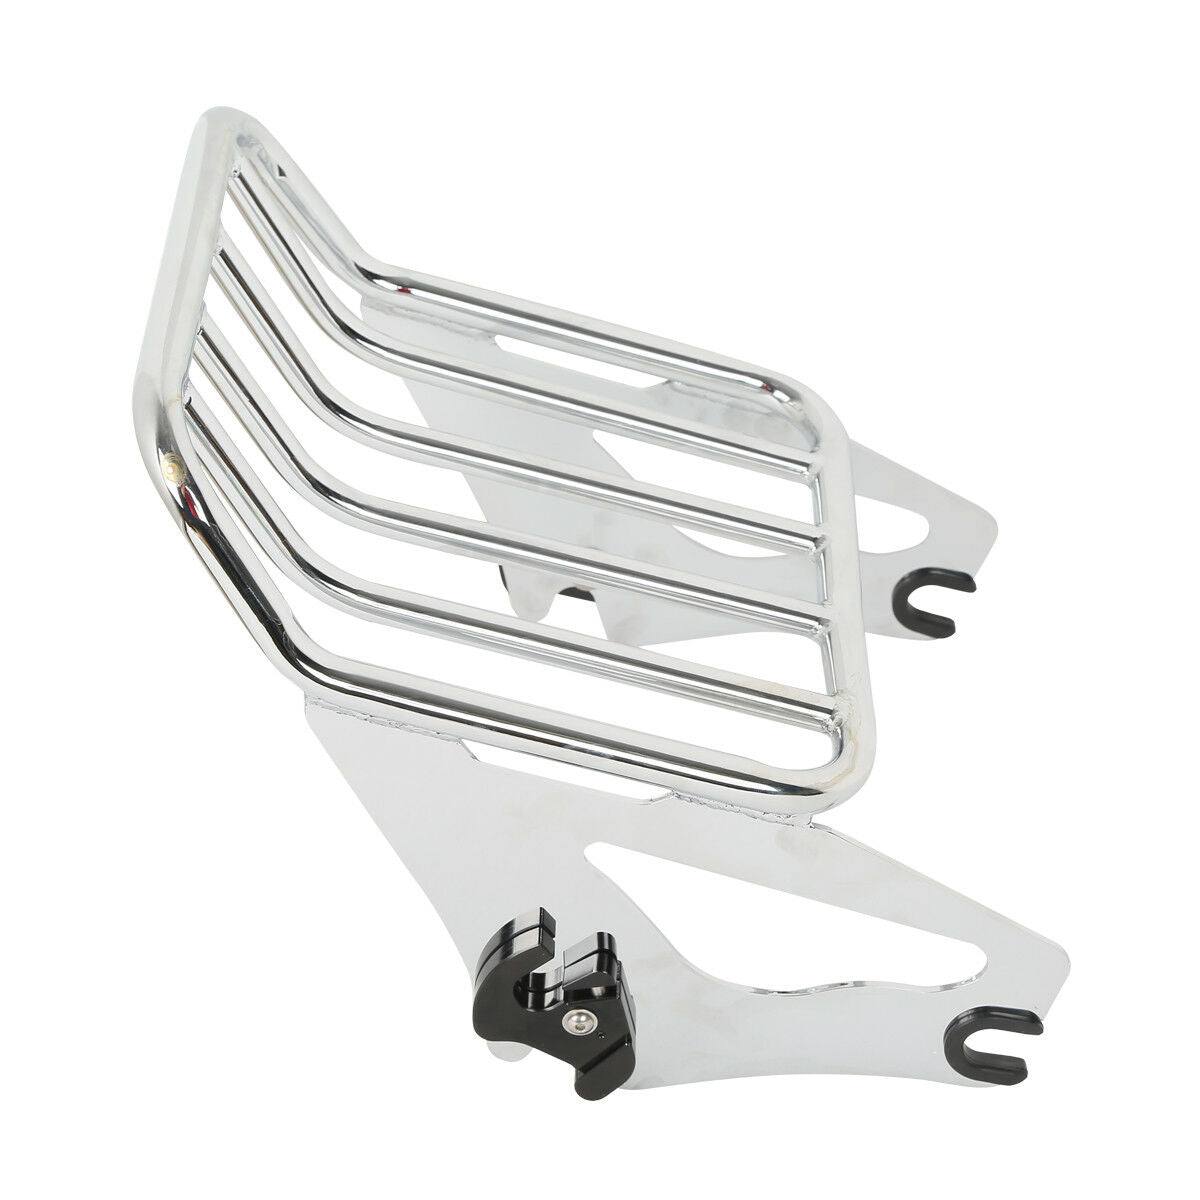 Two Up Luggage Rack Rail Fit For Harley Tour Pak Touring Road King 2009-2021 18 - Moto Life Products